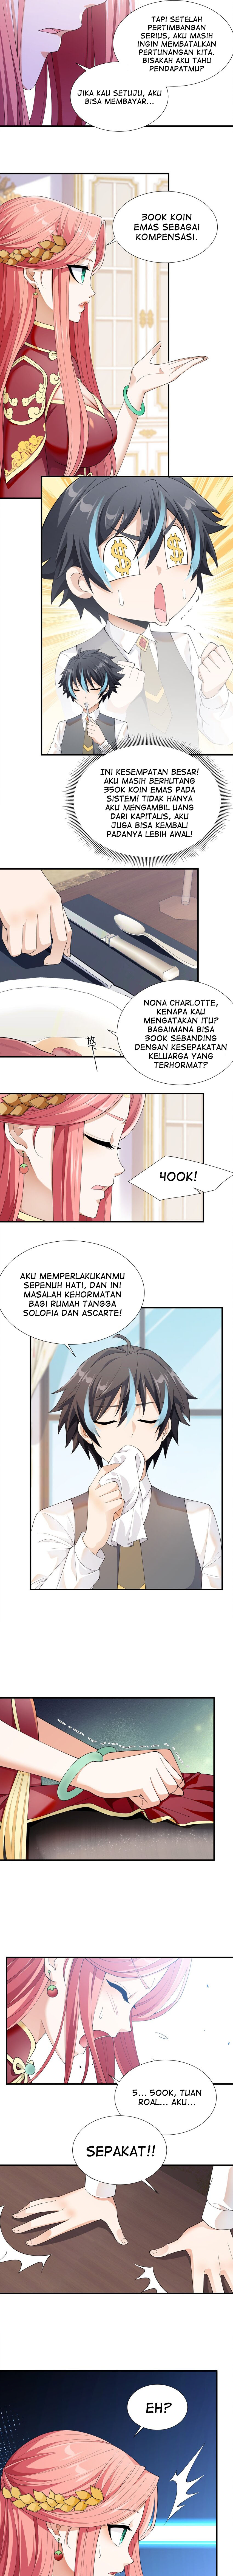 Dilarang COPAS - situs resmi www.mangacanblog.com - Komik little tyrant doesnt want to meet with a bad end 032 - chapter 32 33 Indonesia little tyrant doesnt want to meet with a bad end 032 - chapter 32 Terbaru 5|Baca Manga Komik Indonesia|Mangacan